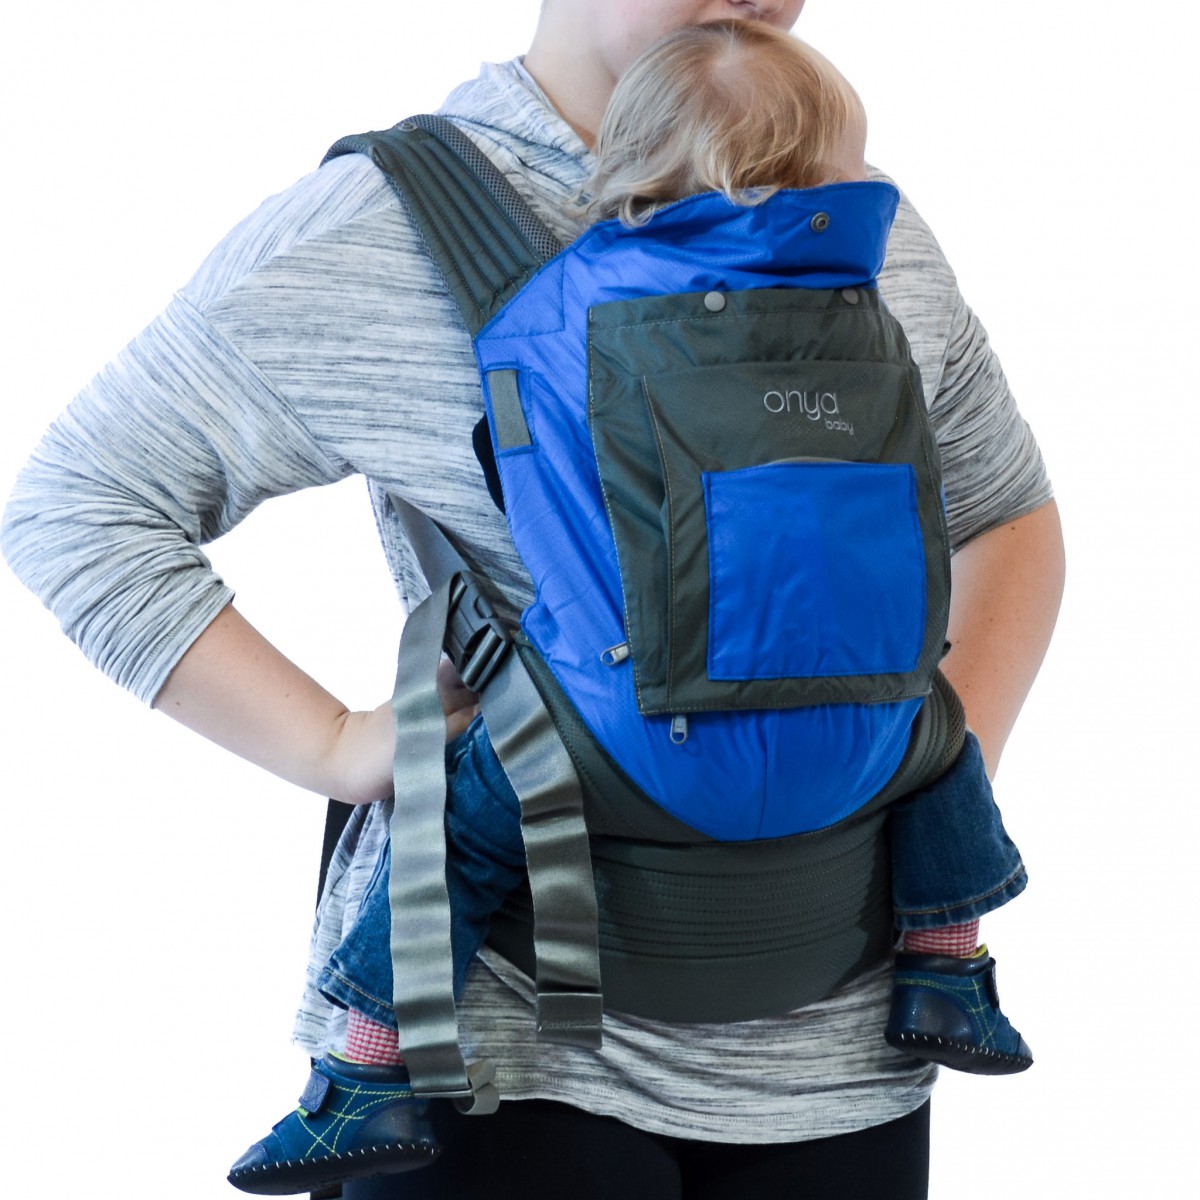 onya baby outback baby carrier review